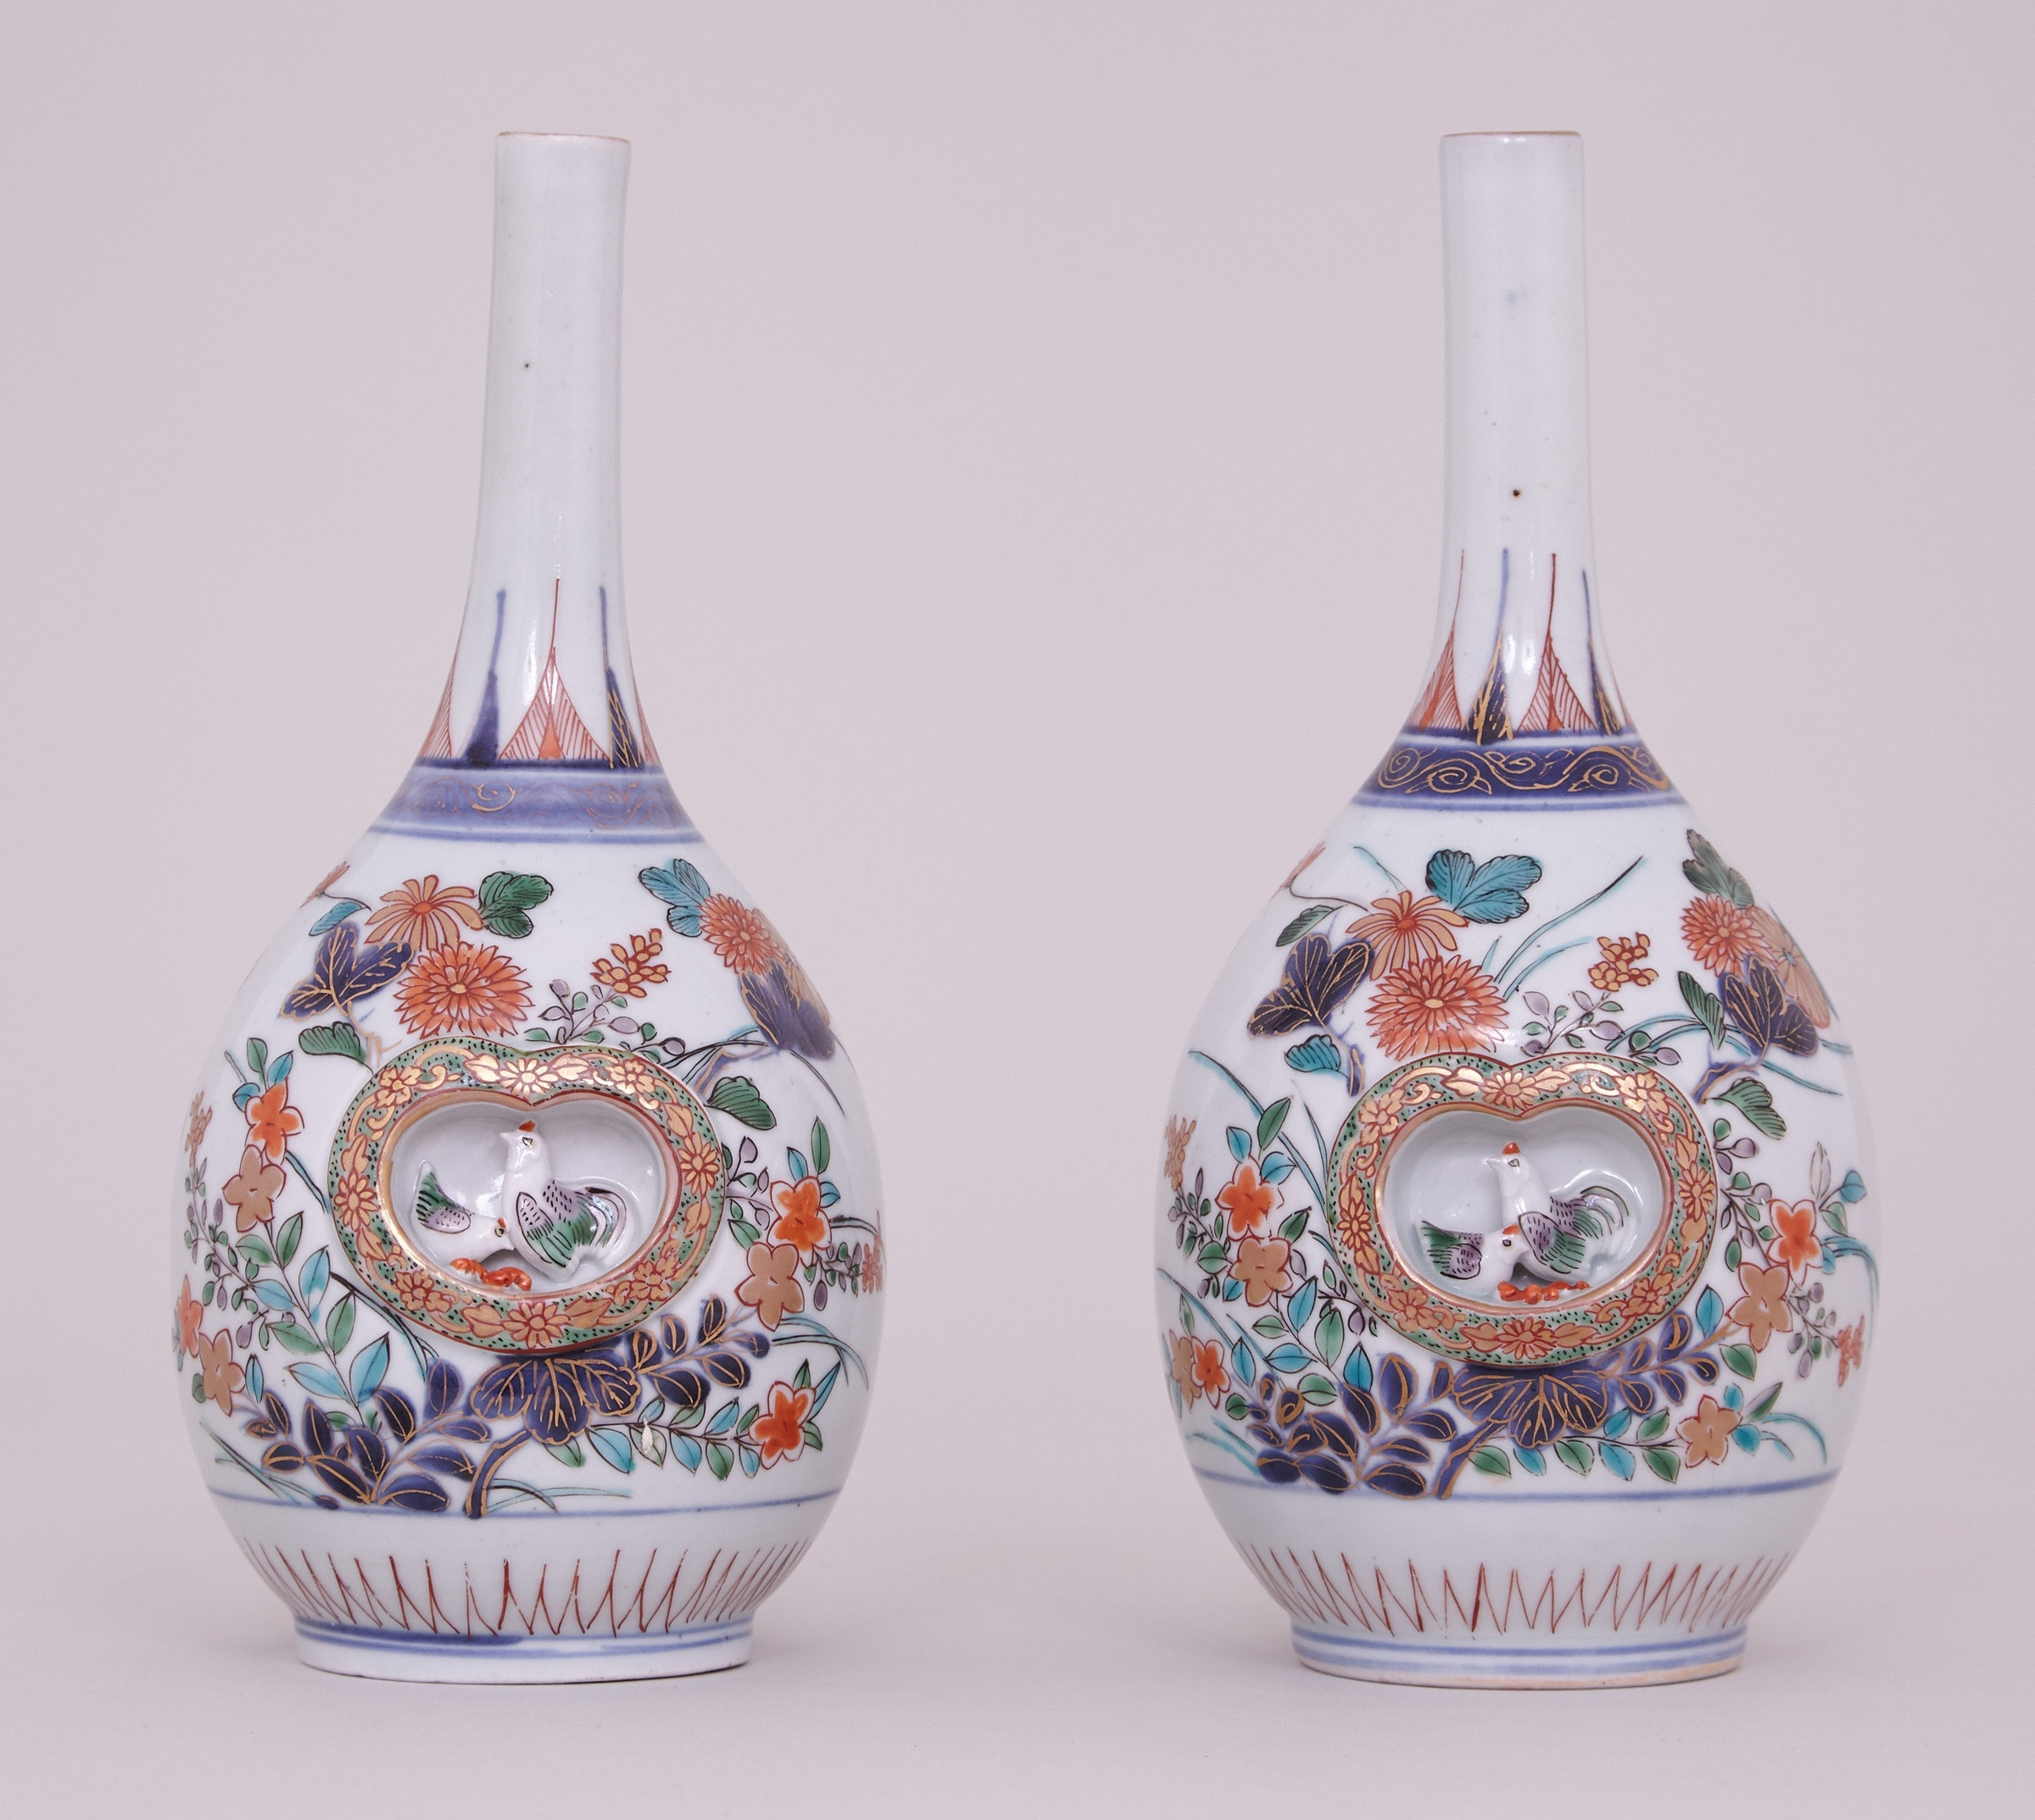 28 Best Very Large Ceramic Vases 2024 free download very large ceramic vases of a pair of fine japanese imari bottle vases late 17th early 18th with regard to a pair of fine japanese imari bottle vases